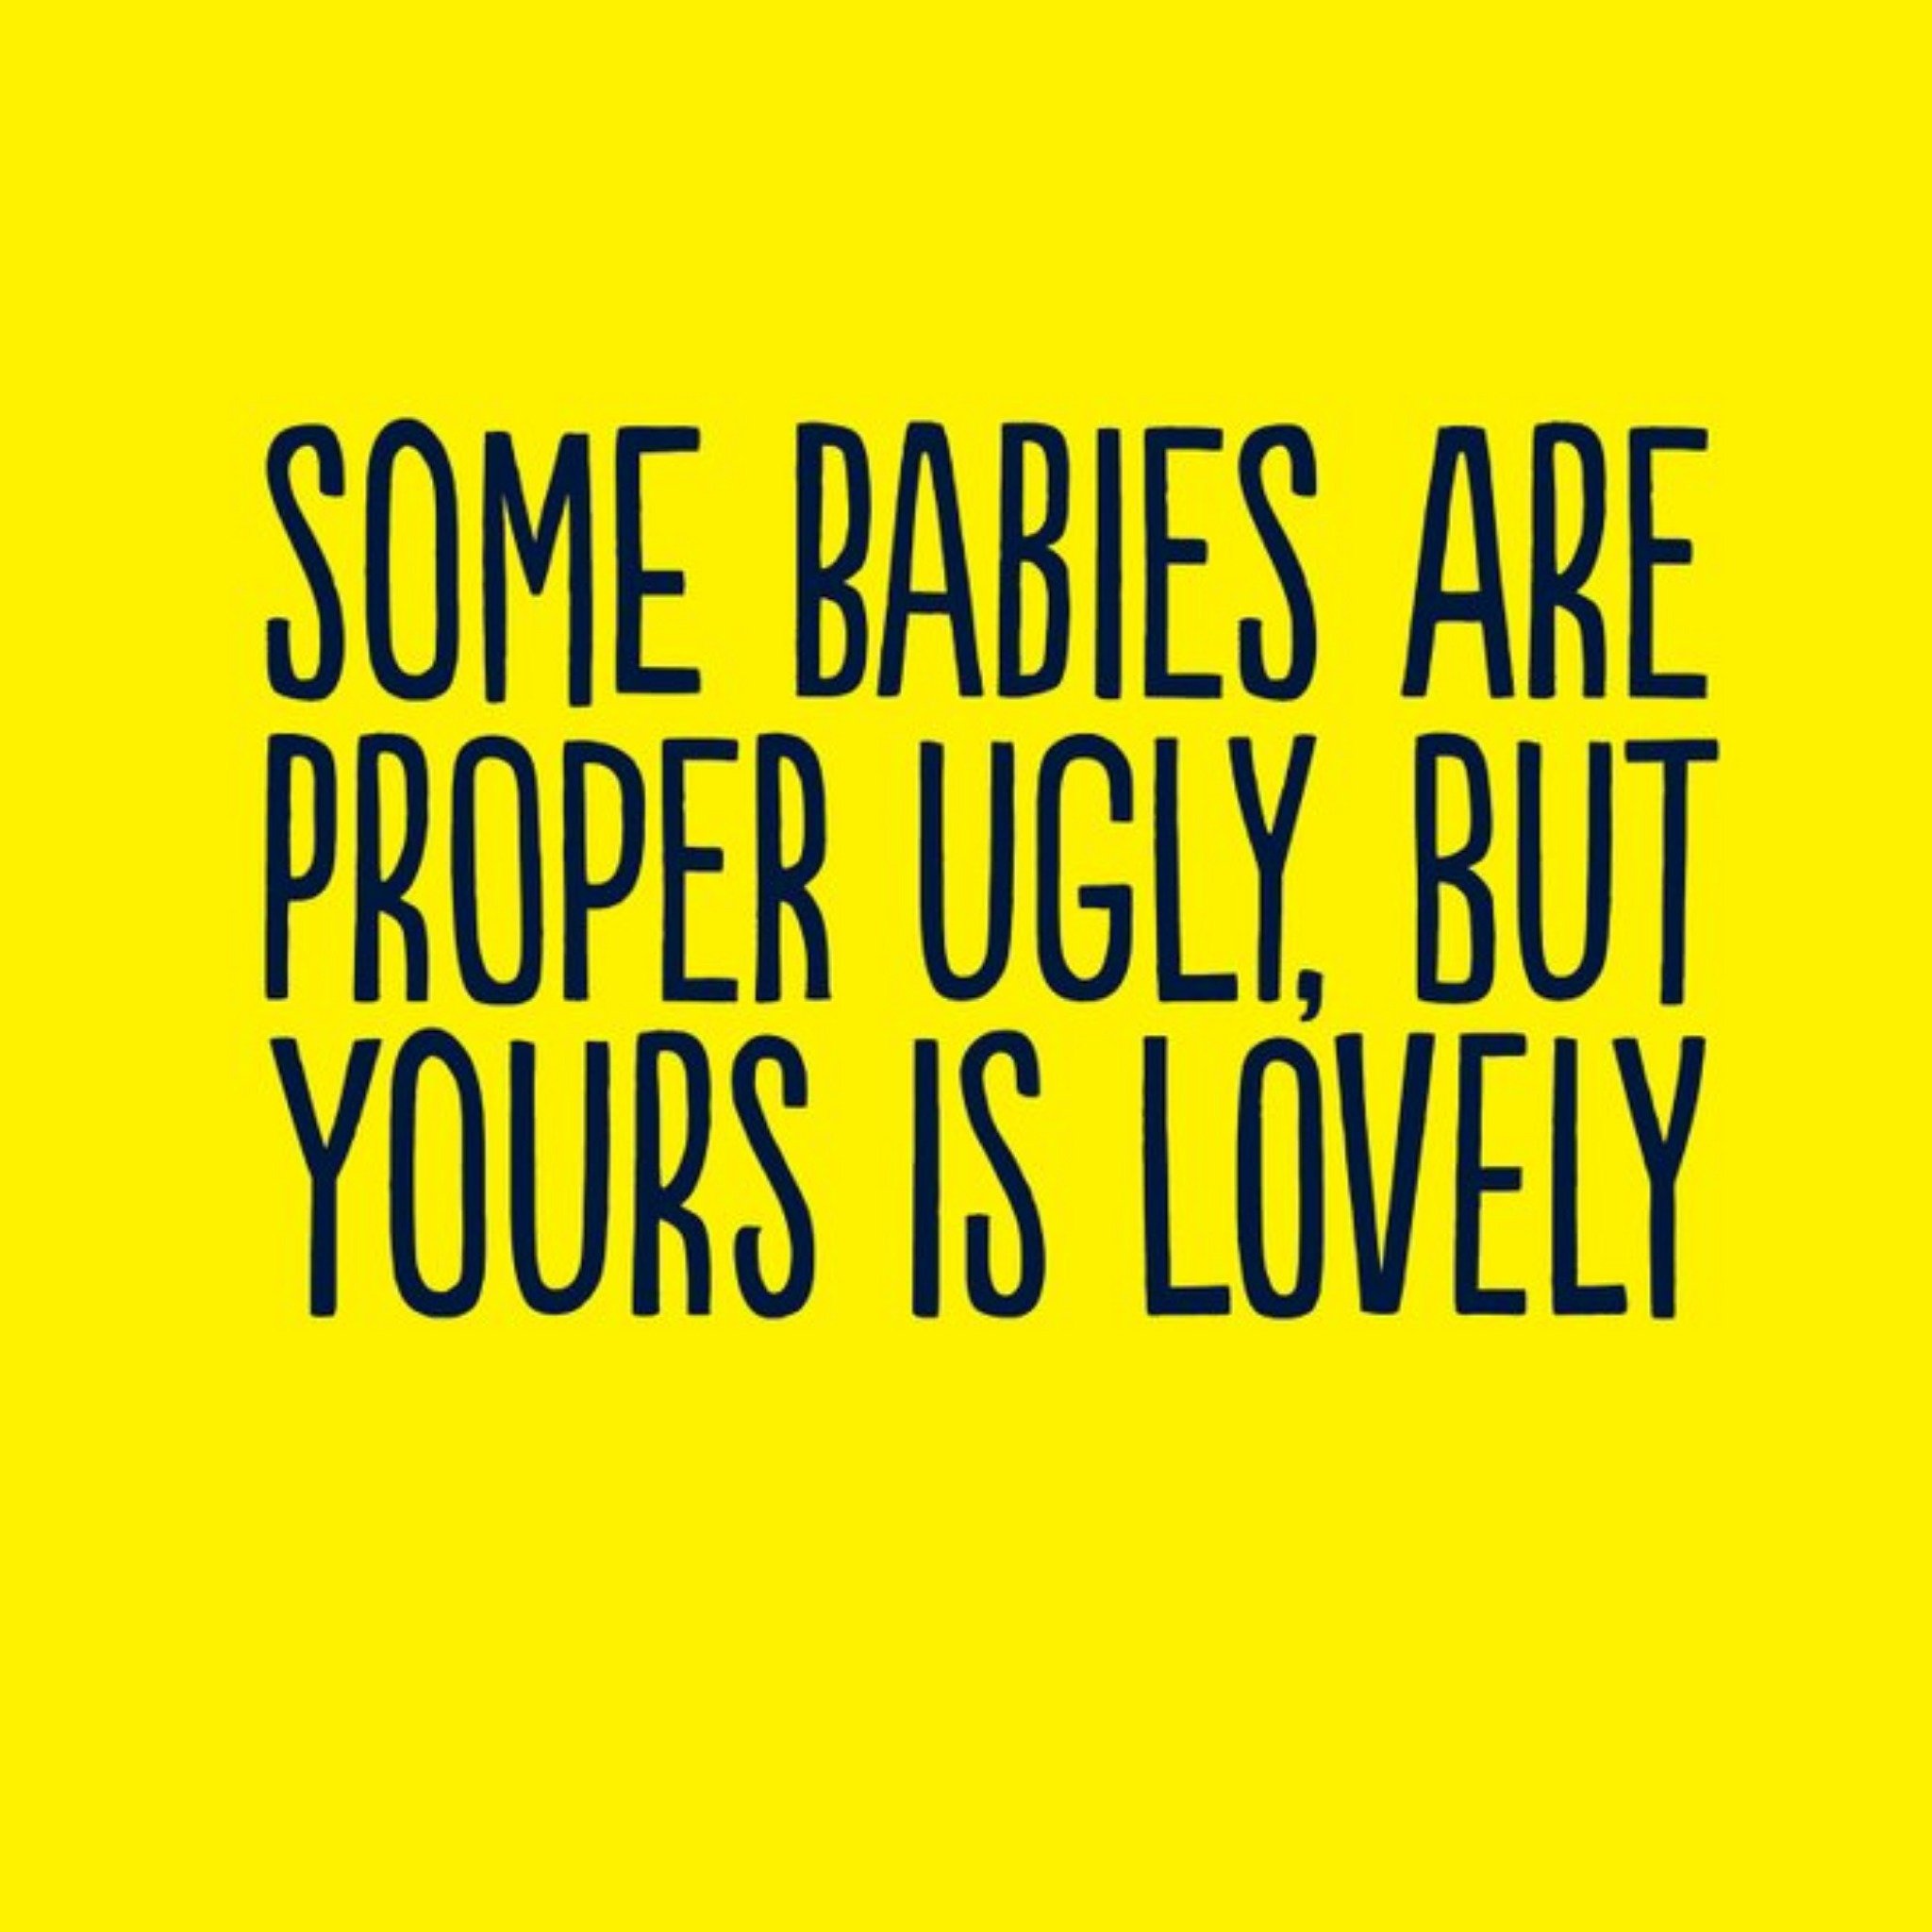 Moonpig Some Babies Are Proper Ugly But Yours Is Lovely Card, Square